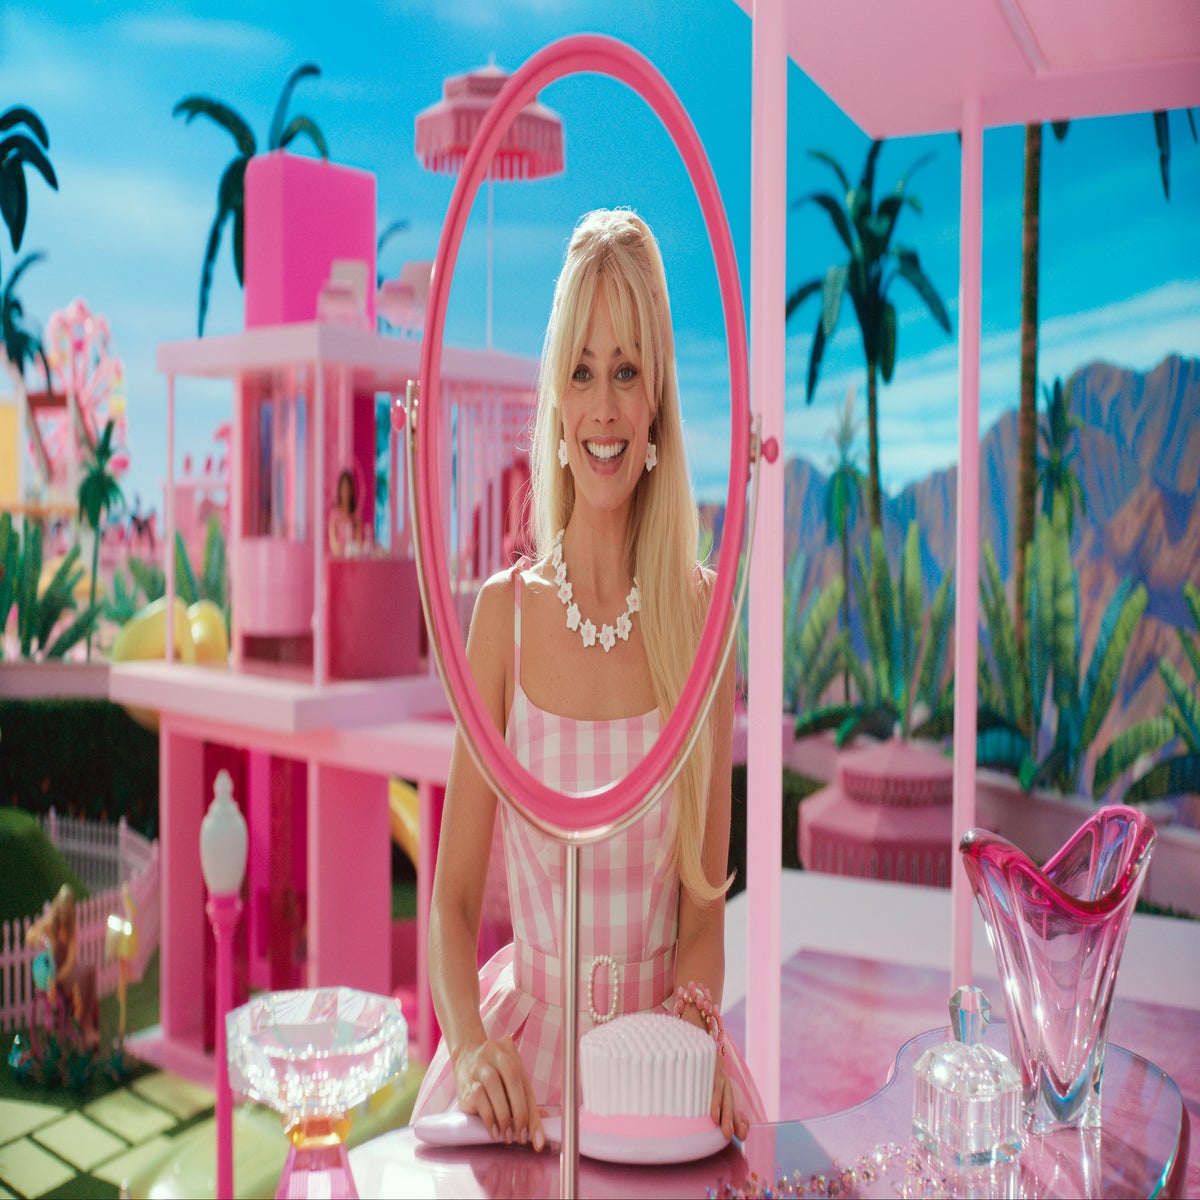 Is the 'Barbie' Movie Appropriate For Younger Kids?